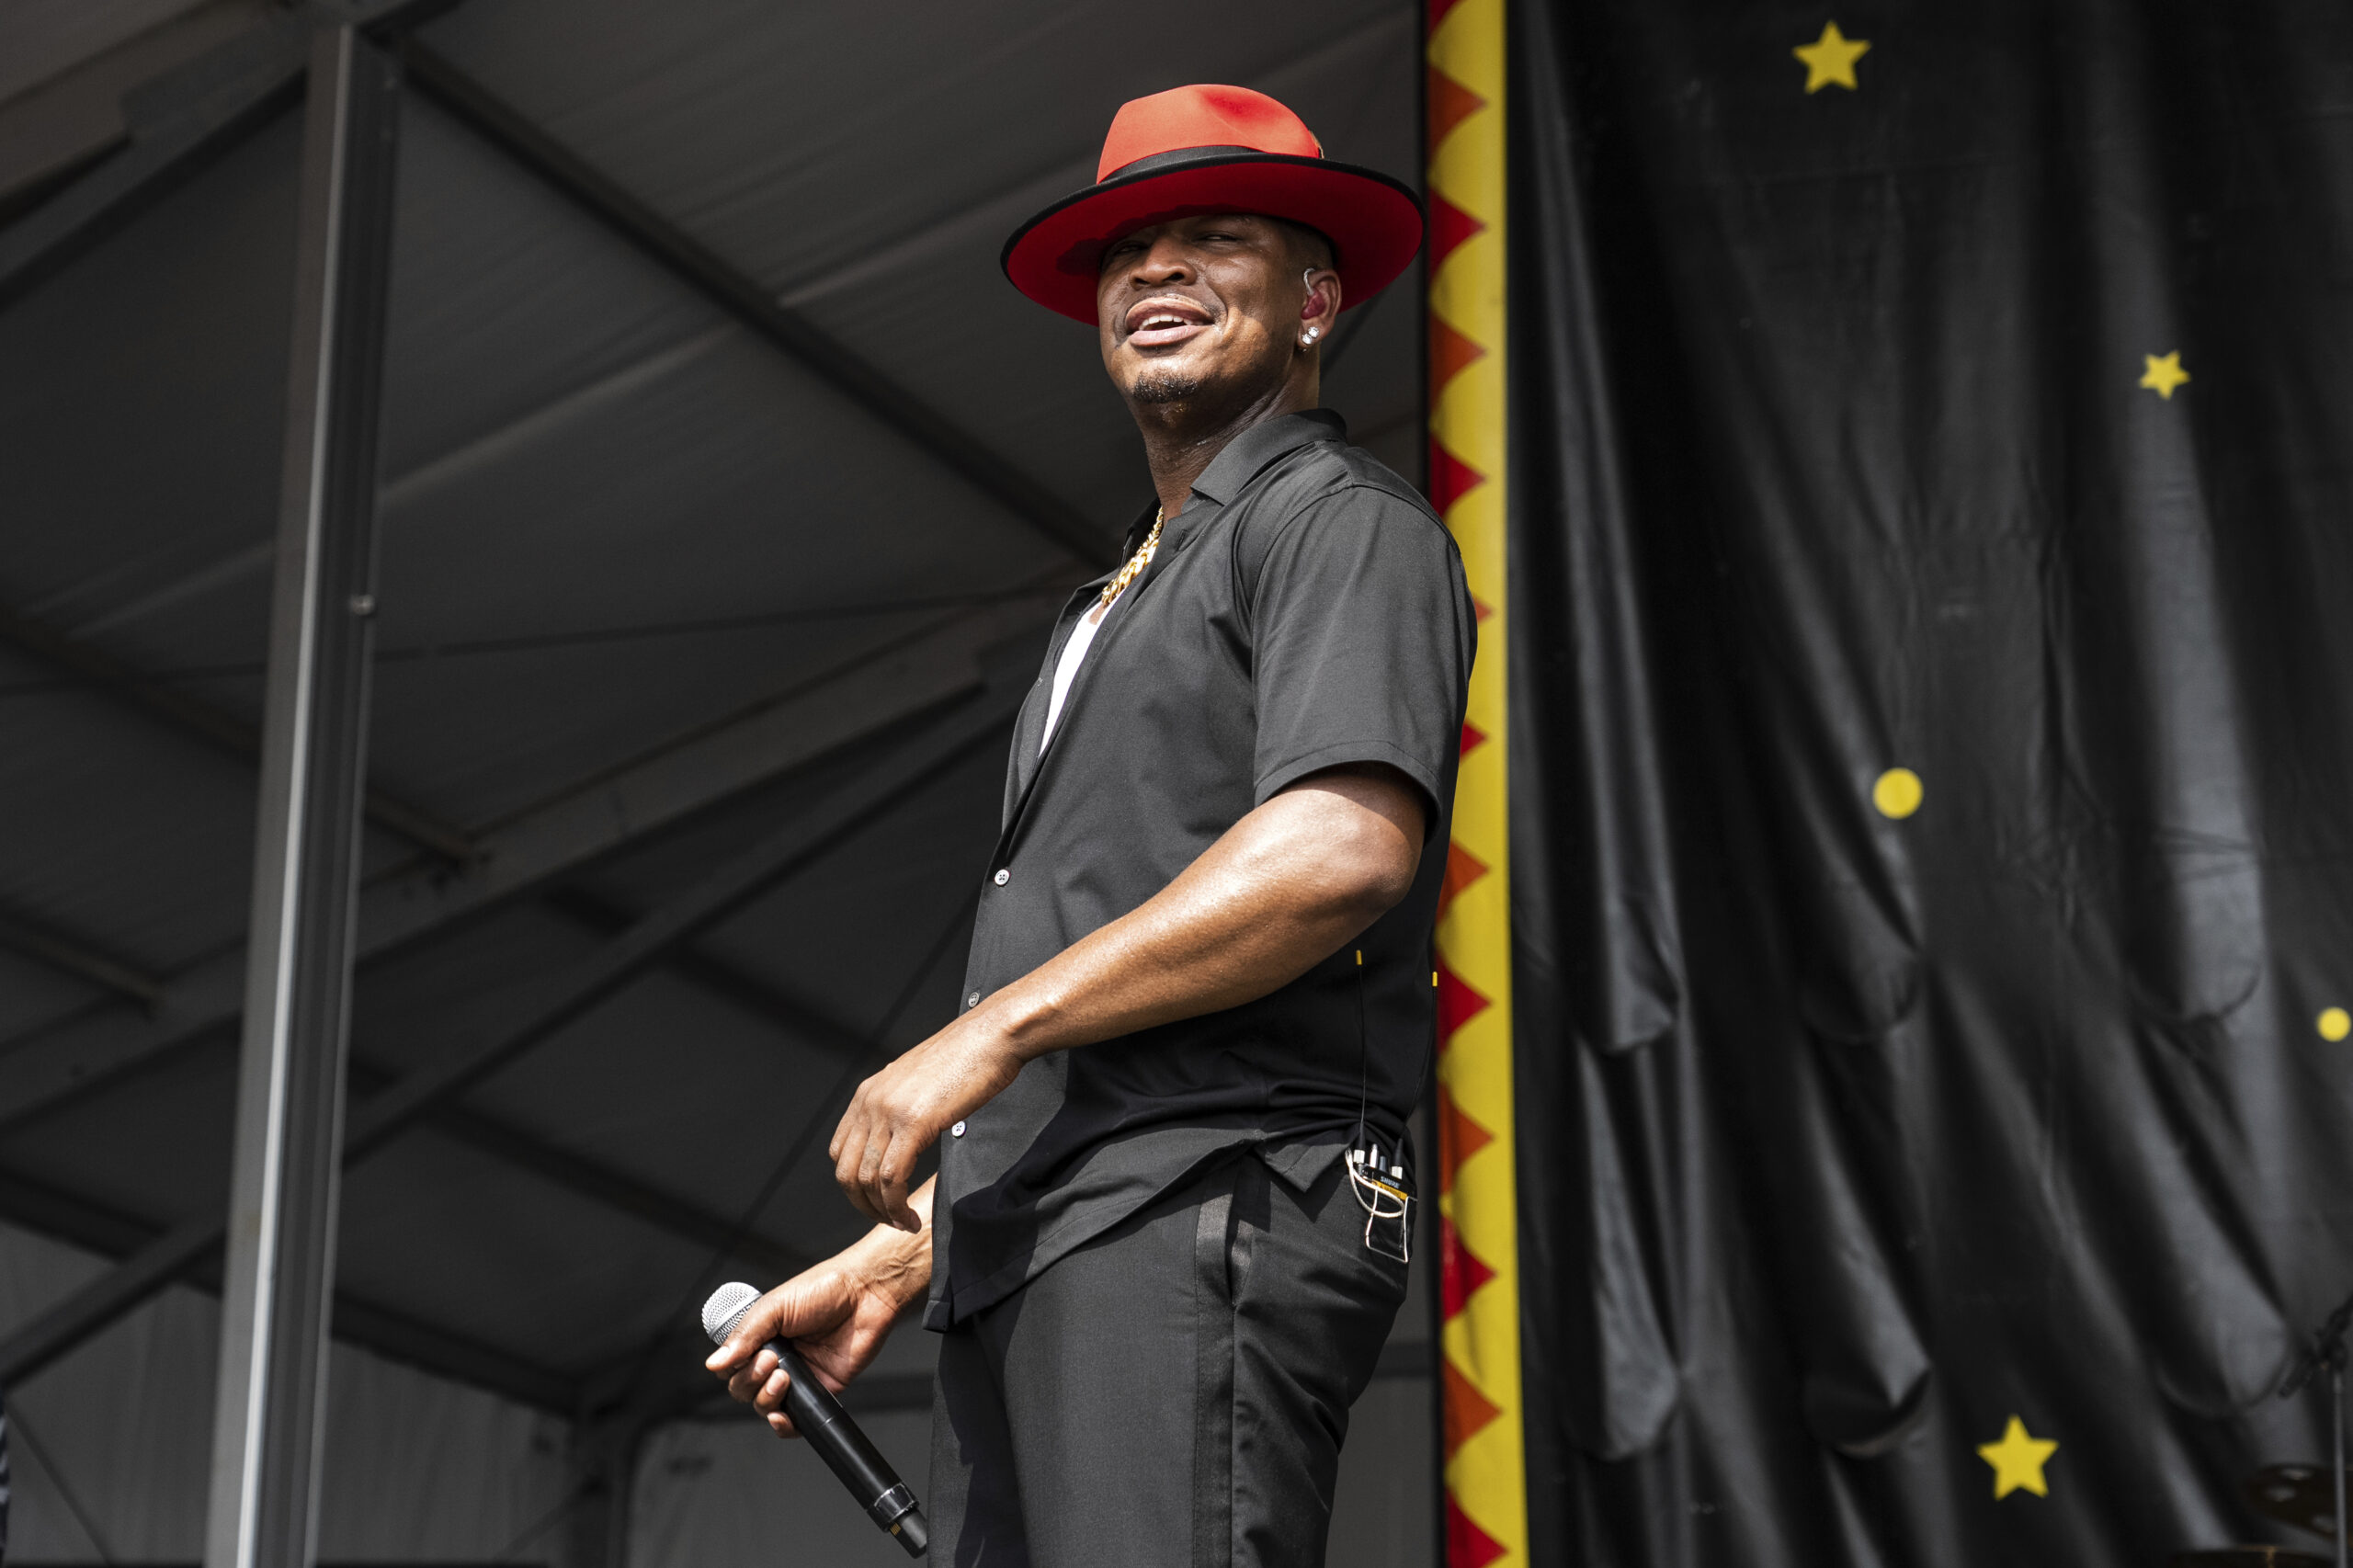 Rapper and R&B singer Ne-Yo questioned gender identity and transgender children but then walked back his comments following an online backlash.